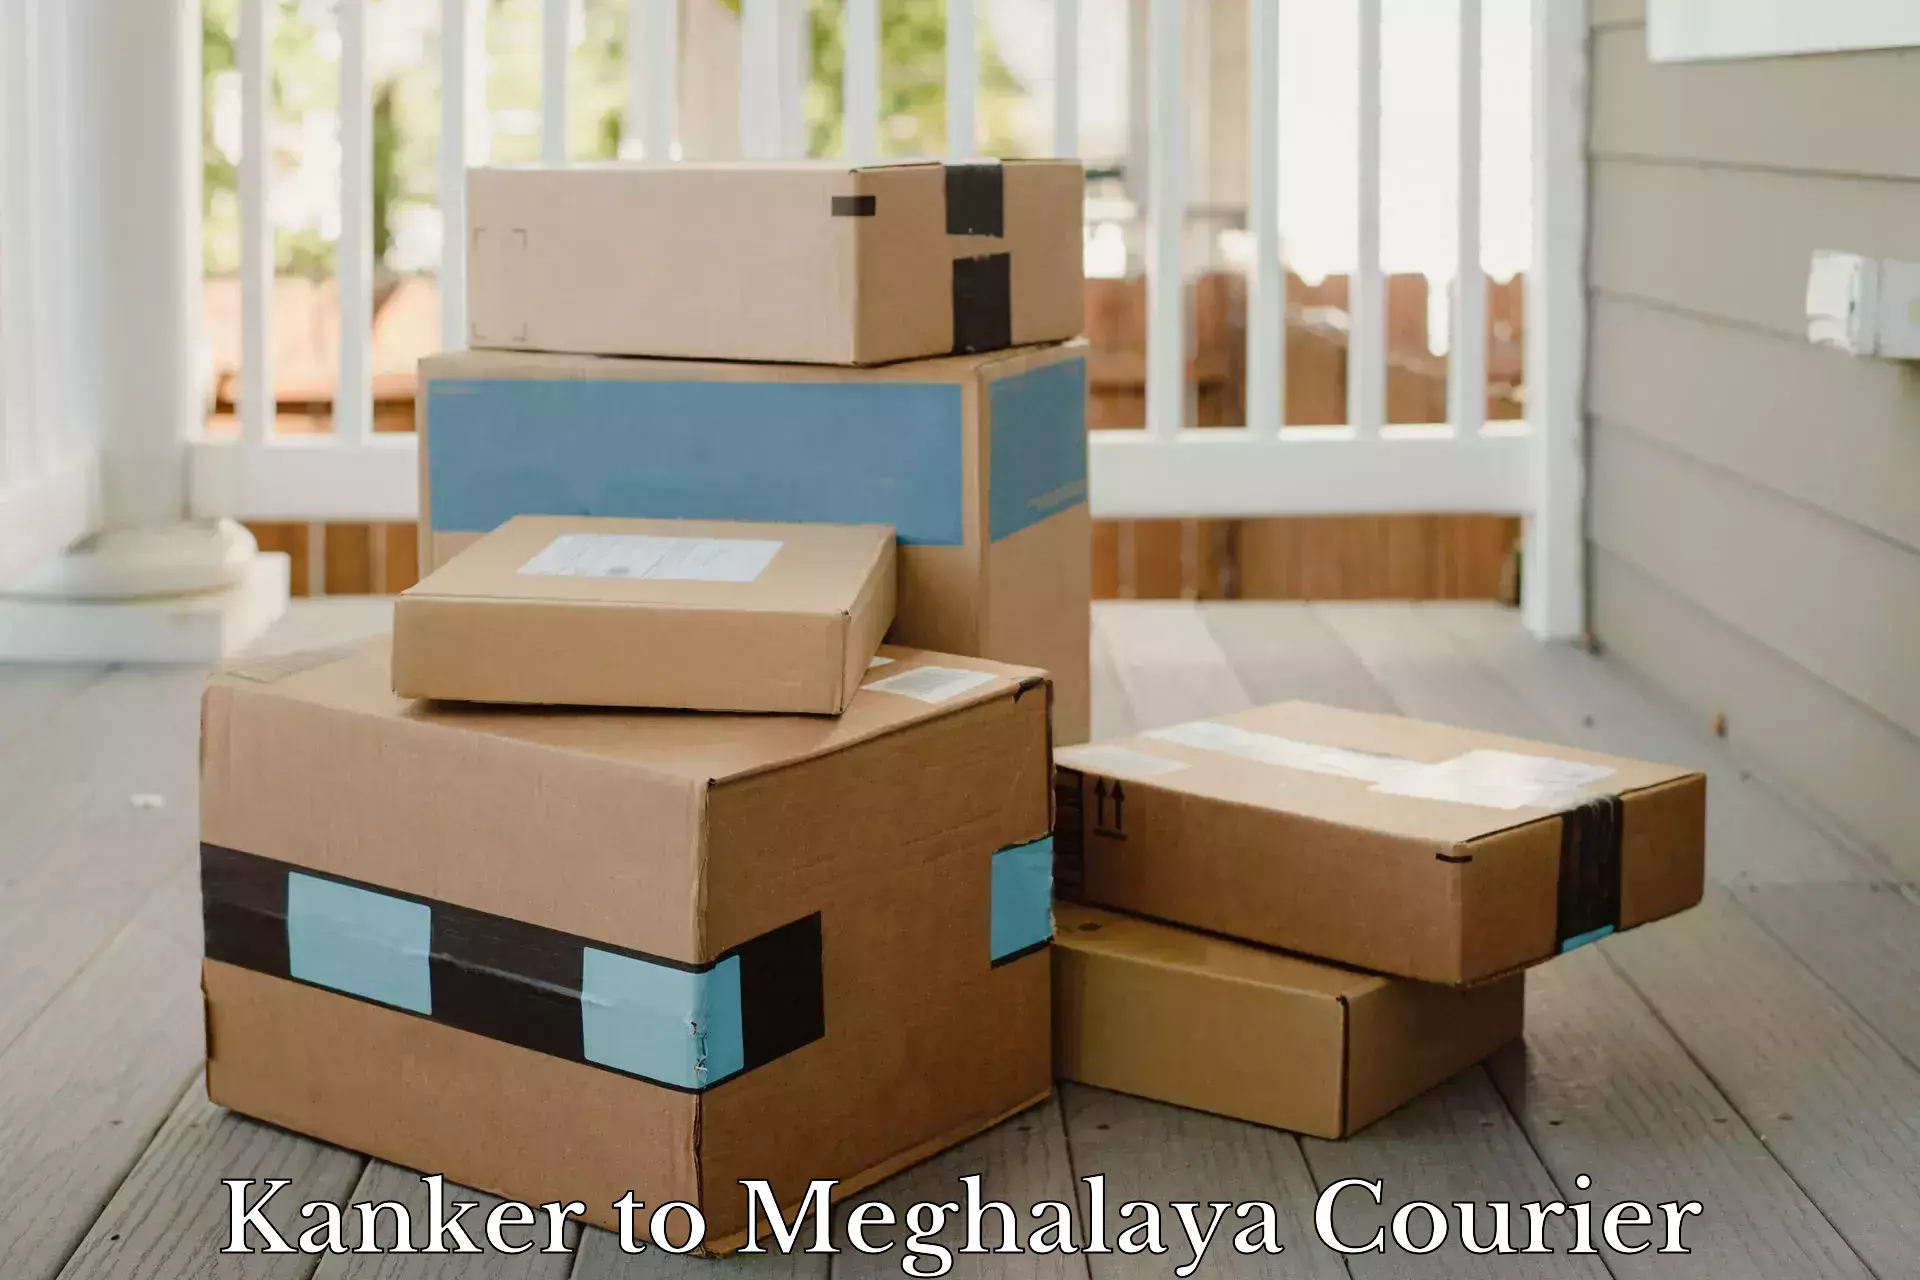 Comprehensive shipping network Kanker to Shillong